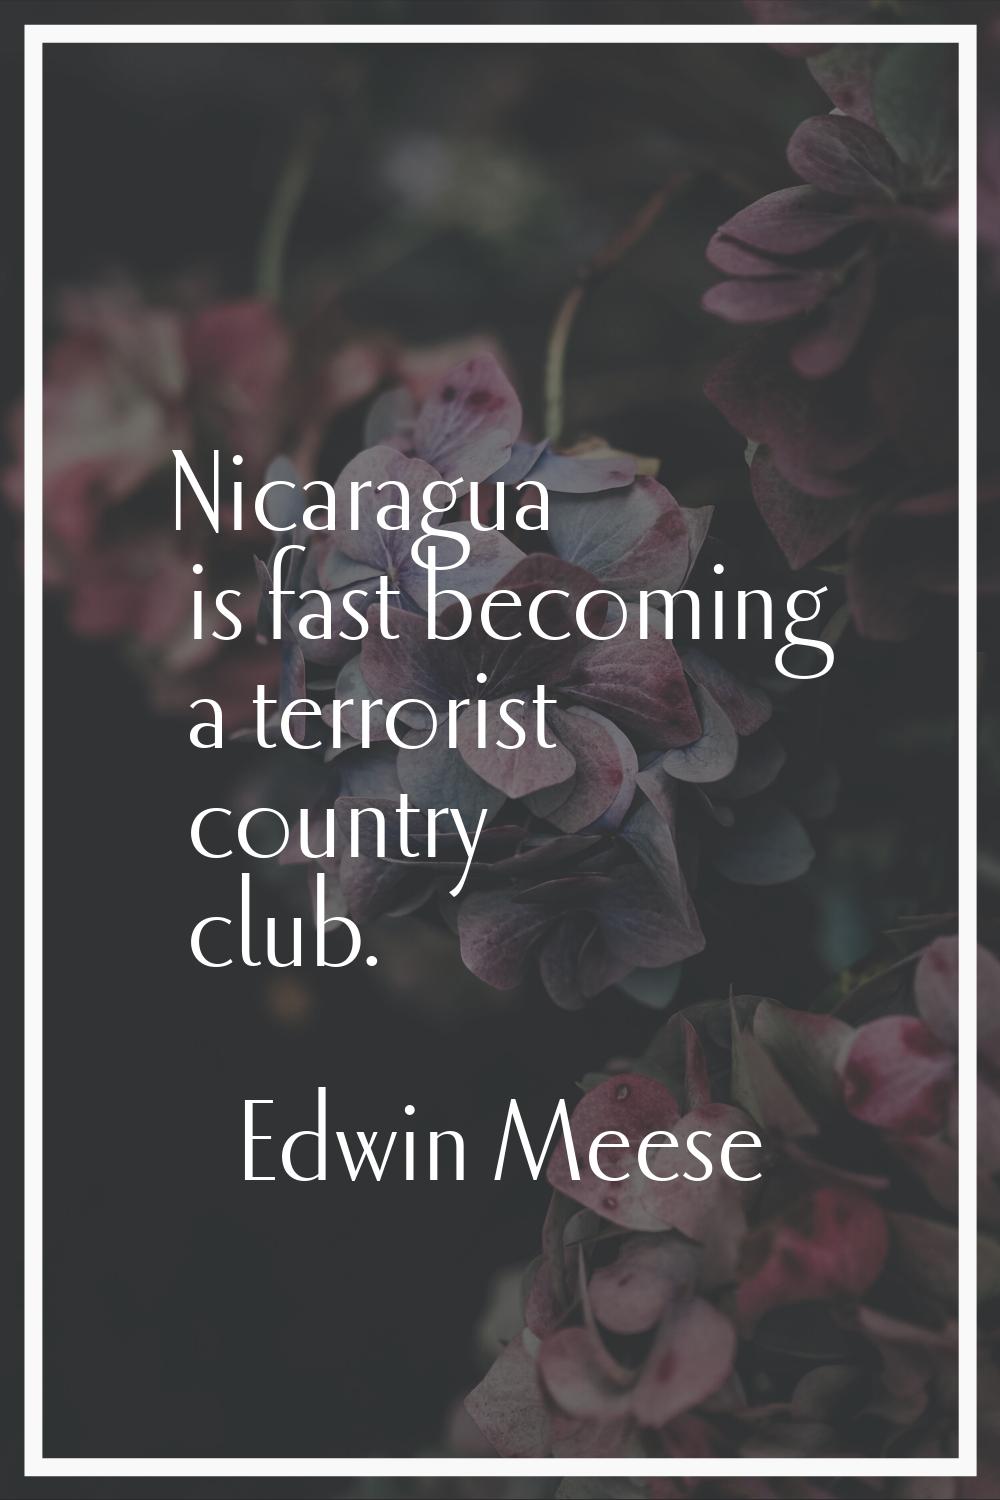 Nicaragua is fast becoming a terrorist country club.